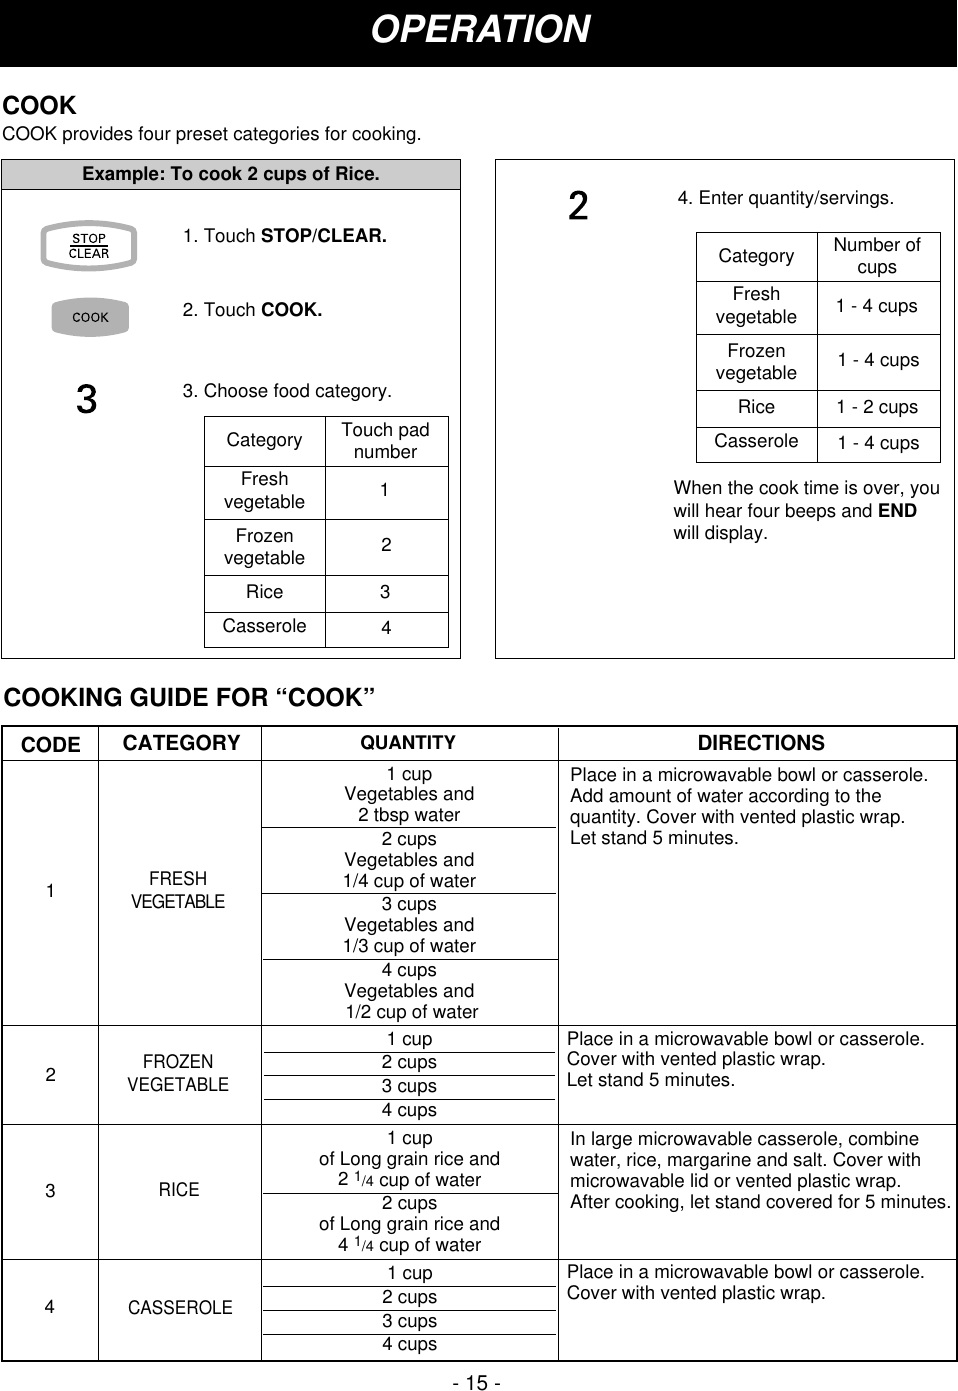 OPERATION1. Touch STOP/CLEAR.2. Touch COOK.3. Choose food category.Example: To cook 2 cups of Rice.COOKCOOK provides four preset categories for cooking.CategoryFreshvegetableFrozenvegetableRiceCasseroleTouch padnumber1234- 15 -4. Enter quantity/servings.When the cook time is over, youwill hear four beeps and ENDwill display.CategoryFreshvegetableFrozenvegetableRiceCasseroleNumber ofcups1 - 4 cups1 - 4 cups1 - 2 cups1 - 4 cupsCOOKING GUIDE FOR “COOK”CATEGORYCODE QUANTITYDIRECTIONSFRESHVEGETABLEFROZENVEGETABLERICECASSEROLE1234Place in a microwavable bowl or casserole.Add amount of water according to thequantity. Cover with vented plastic wrap. Let stand 5 minutes.1 cup Vegetables and 2 tbsp water2 cups Vegetables and  1/4 cup of water3 cups  Vegetables and 1/3 cup of water4 cups Vegetables and 1/2 cup of waterPlace in a microwavable bowl or casserole.Cover with vented plastic wrap.Let stand 5 minutes.1 cup2 cups3 cups4 cups1 cup2 cups3 cups4 cupsIn large microwavable casserole, combinewater, rice, margarine and salt. Cover withmicrowavable lid or vented plastic wrap. After cooking, let stand covered for 5 minutes.1 cup of Long grain rice and2 1/4 cup of water2 cups of Long grain rice and4 1/4 cup of waterPlace in a microwavable bowl or casserole.Cover with vented plastic wrap.